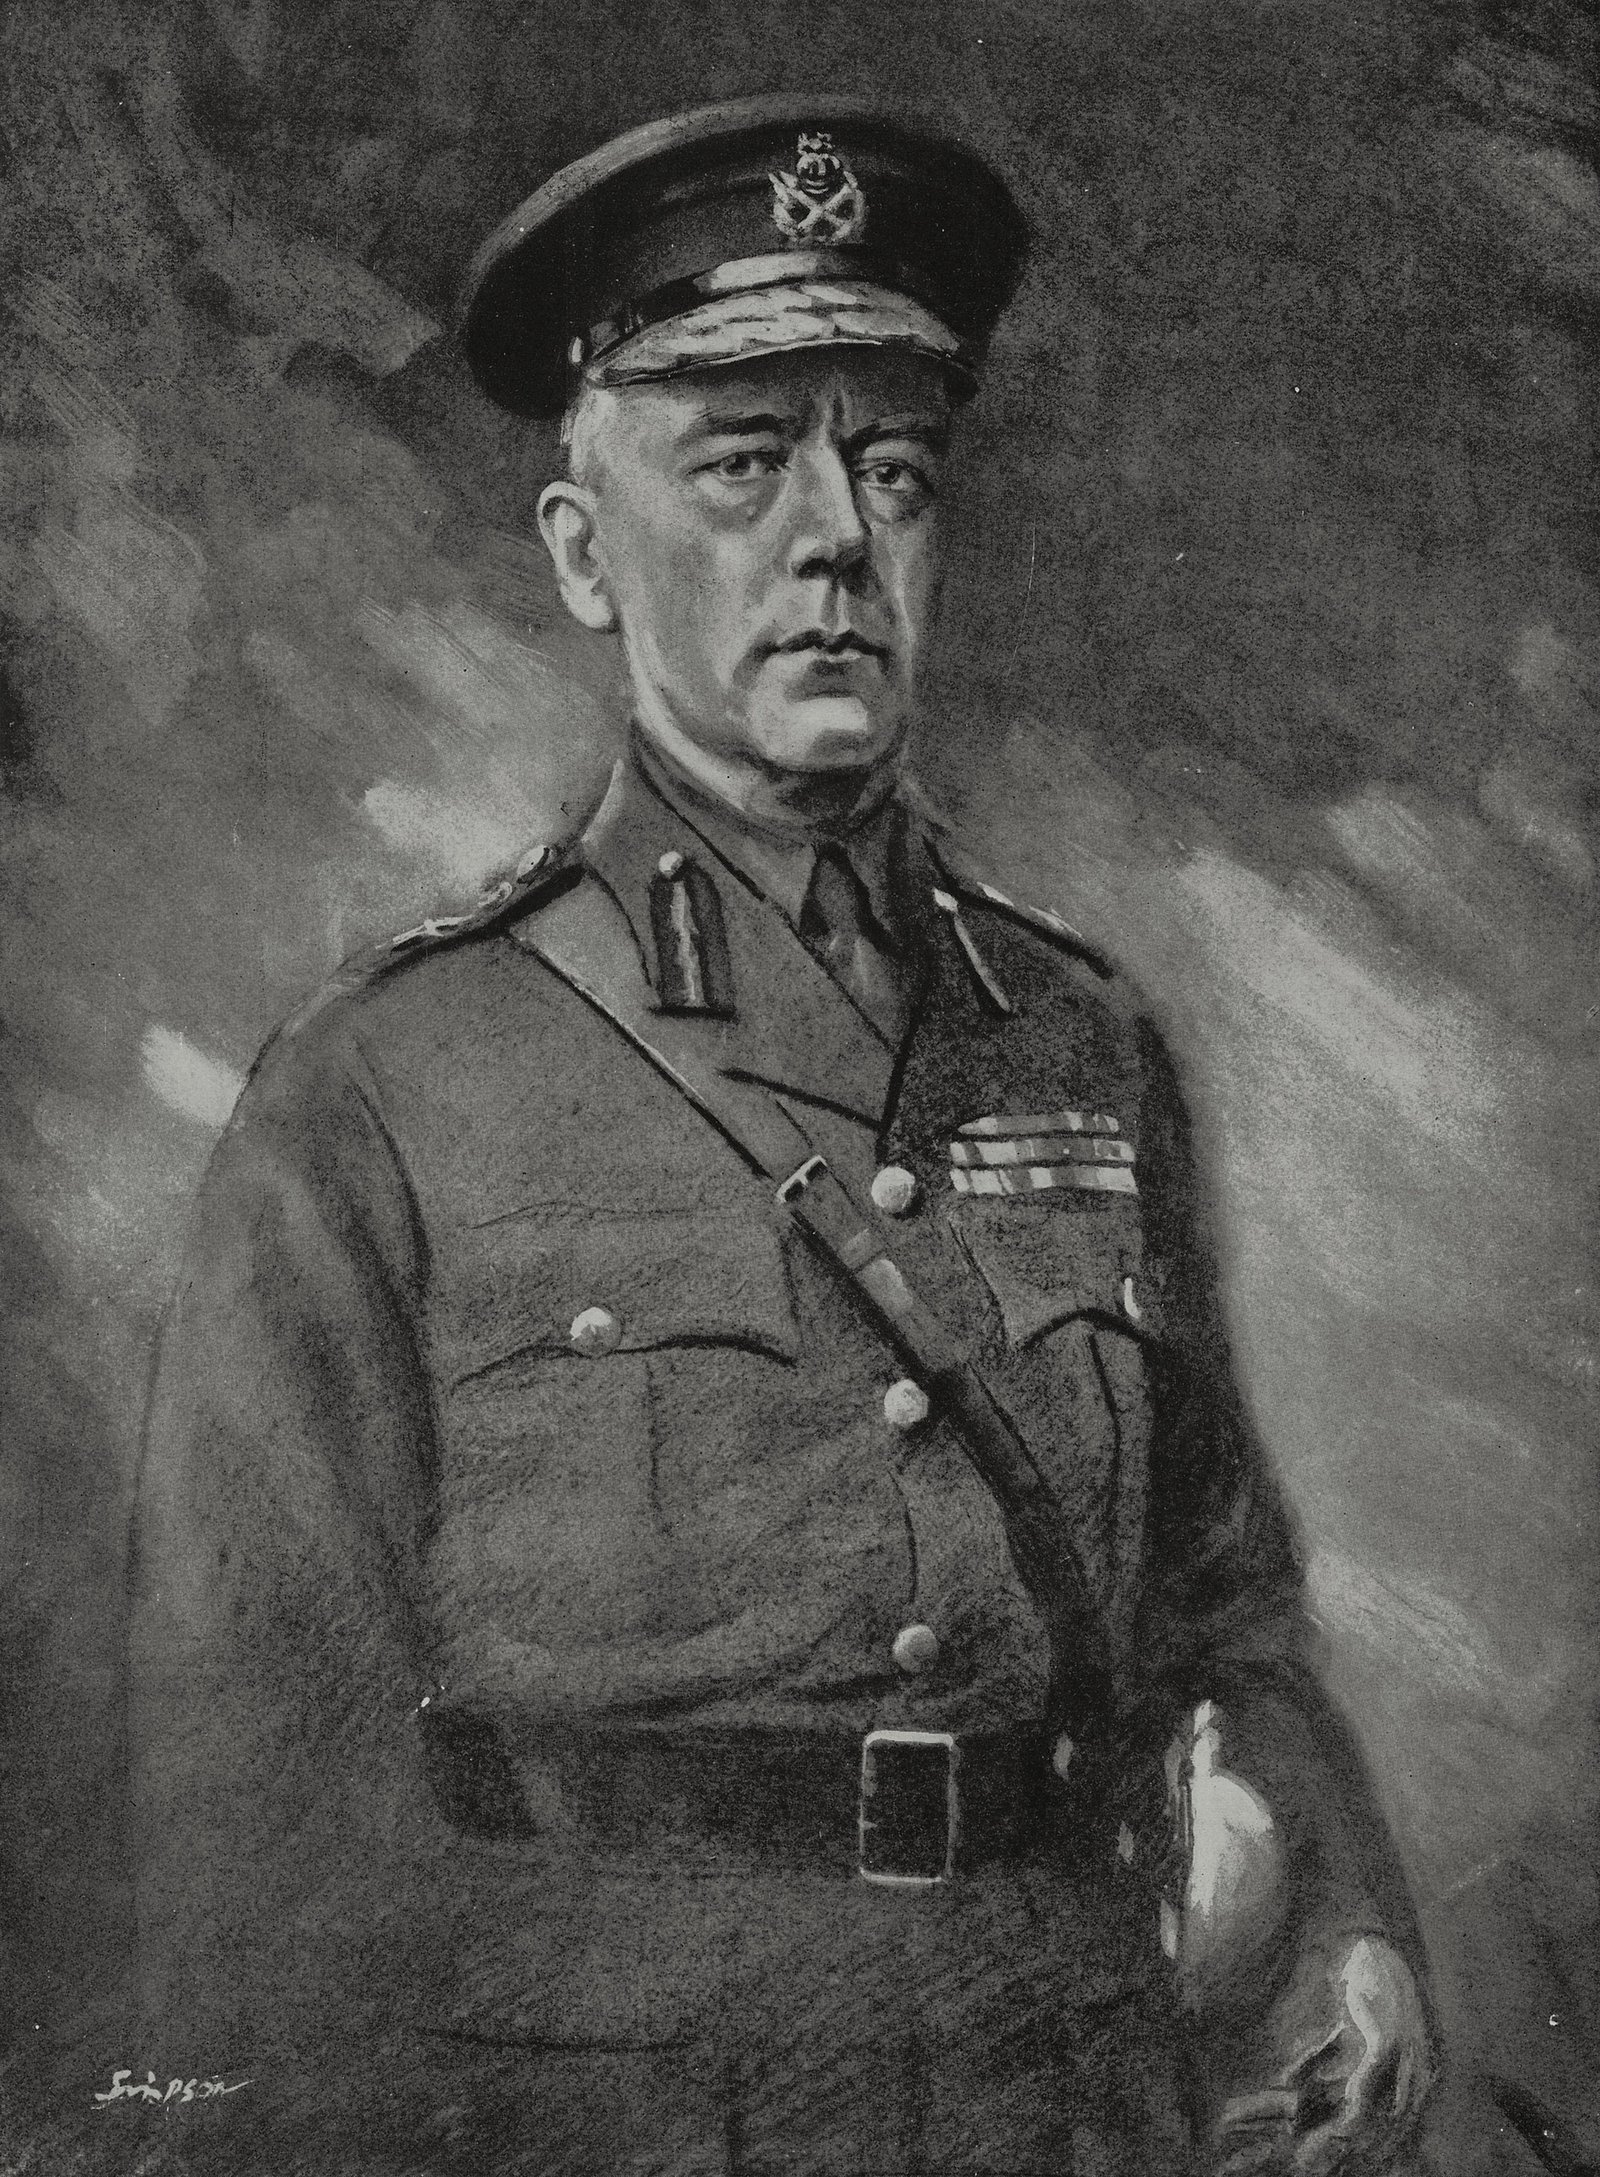 Image - General Sir Nevil Macready in 1920. Image: Getty Images